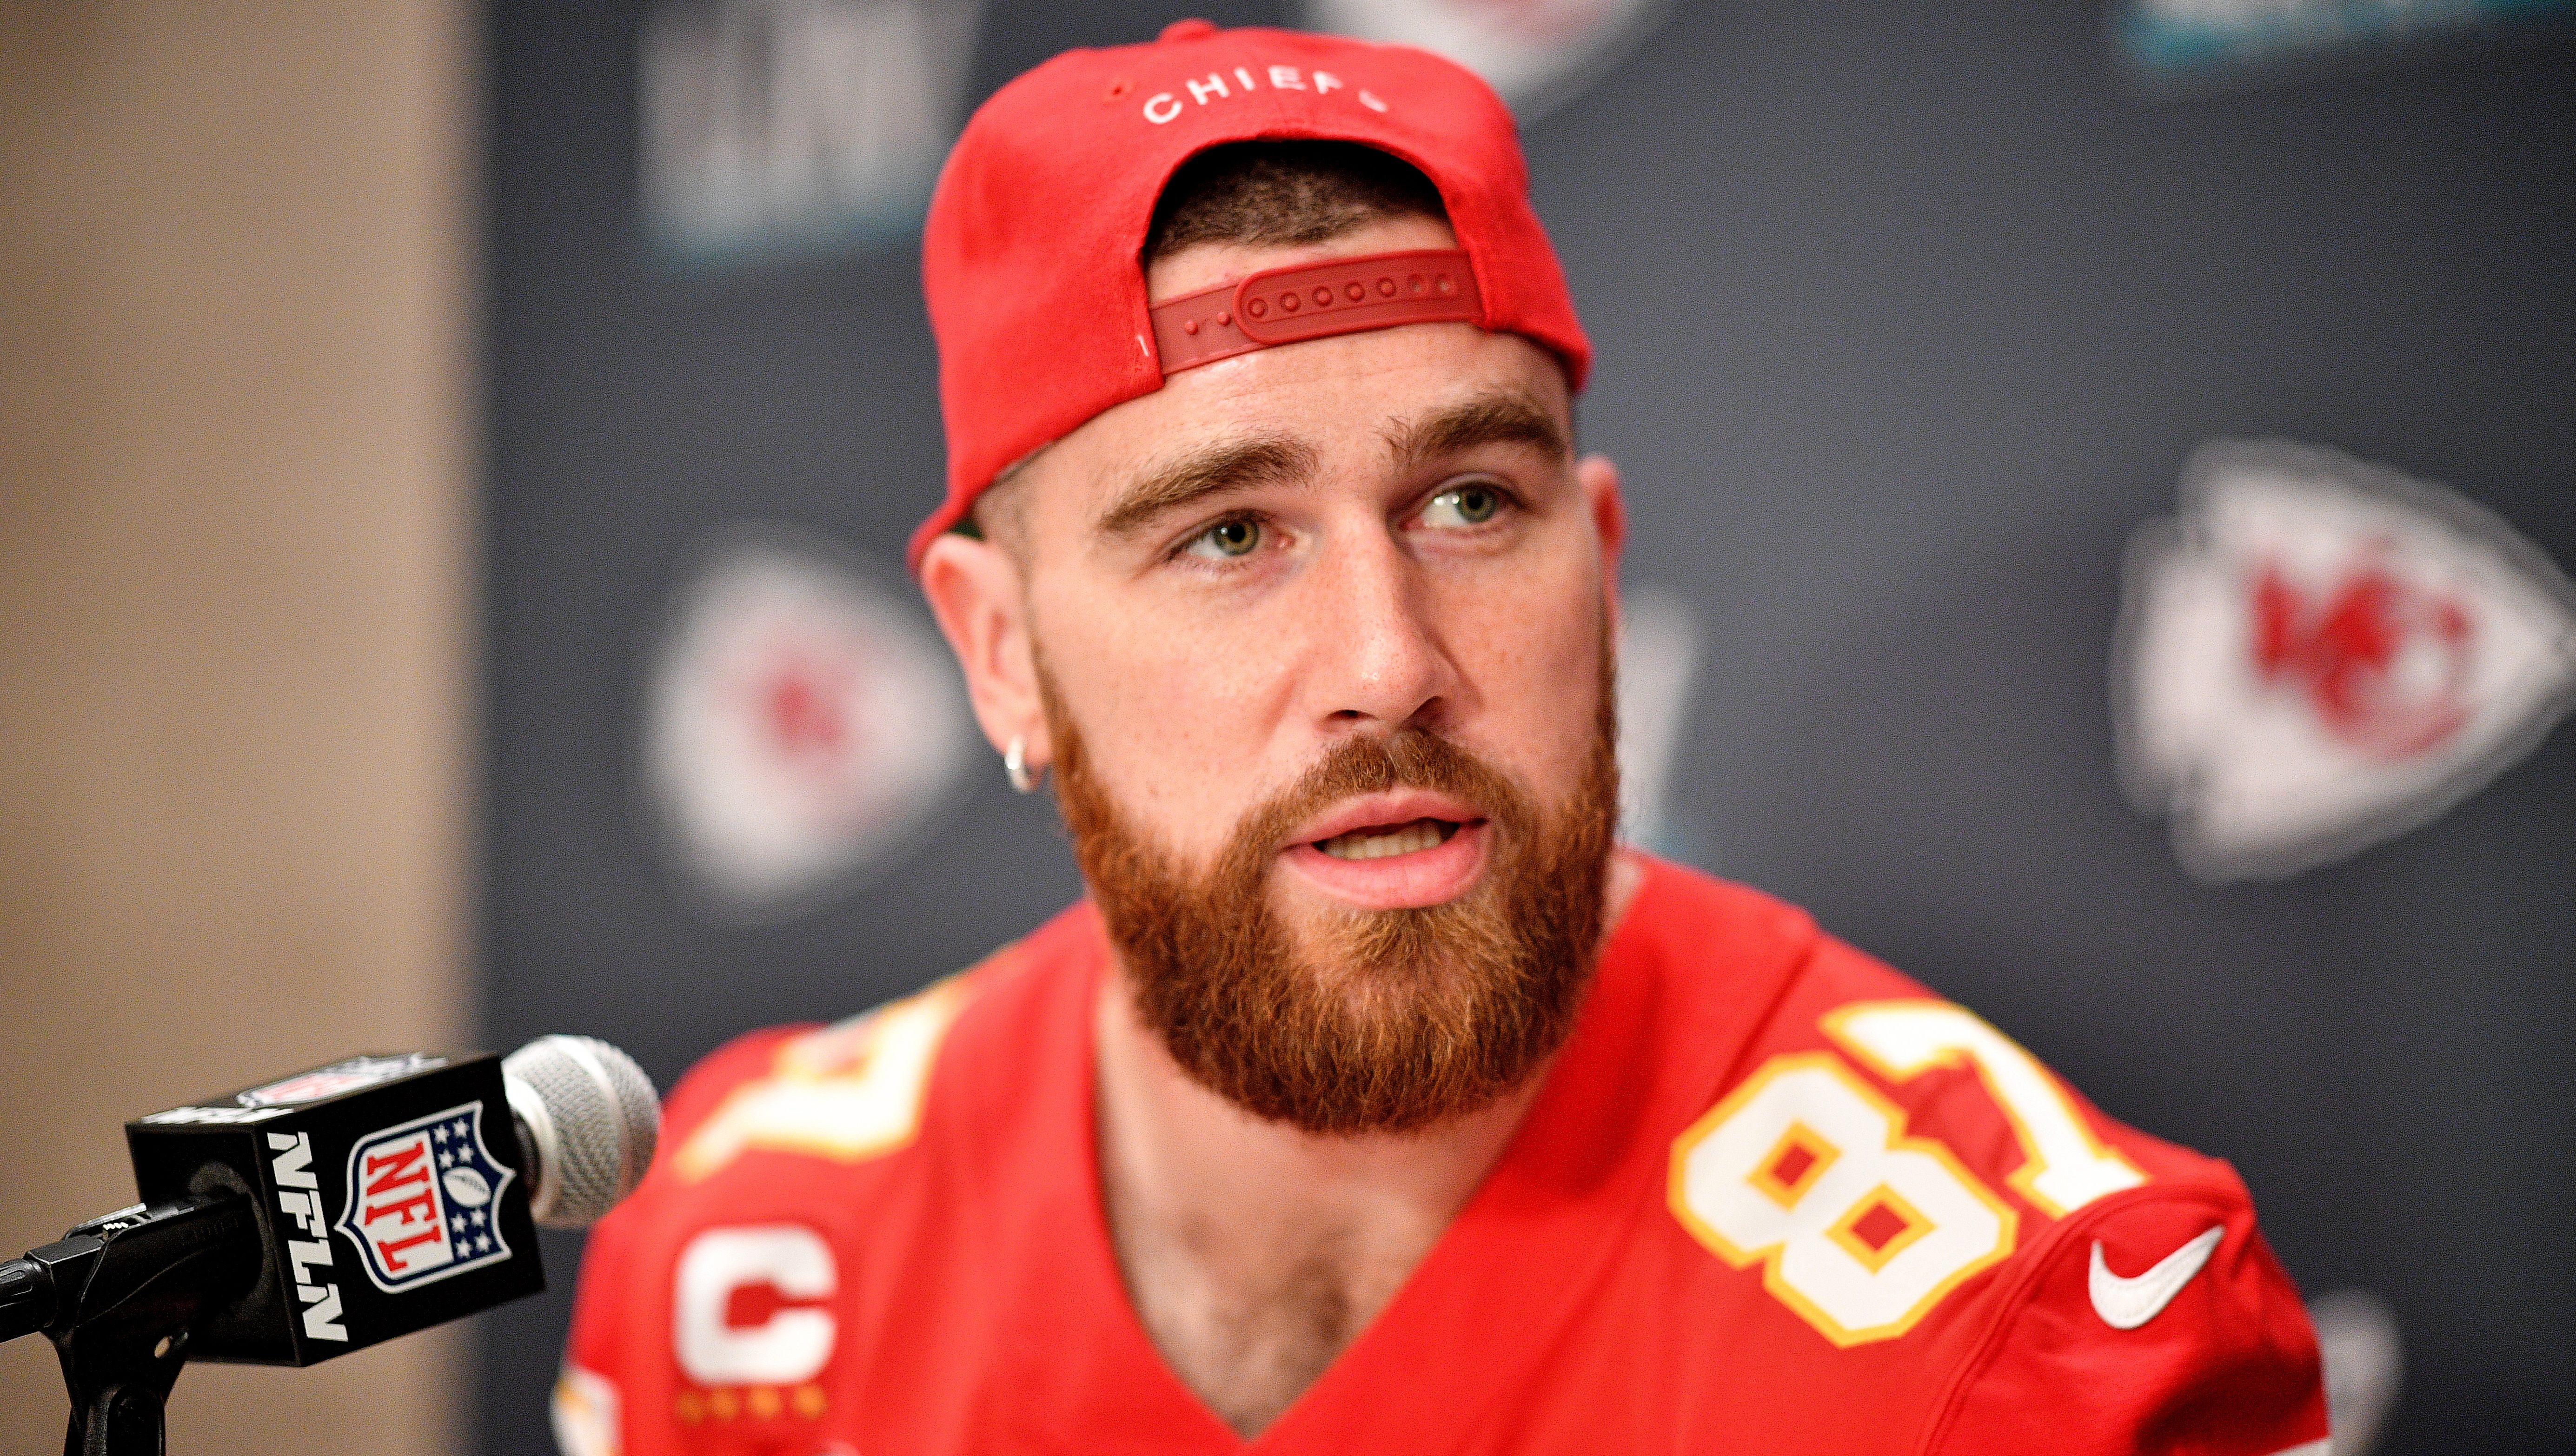 Fans React to Chiefs TE Travis Kelce's Pregame Outfit vs. Cowboys [LOOK]